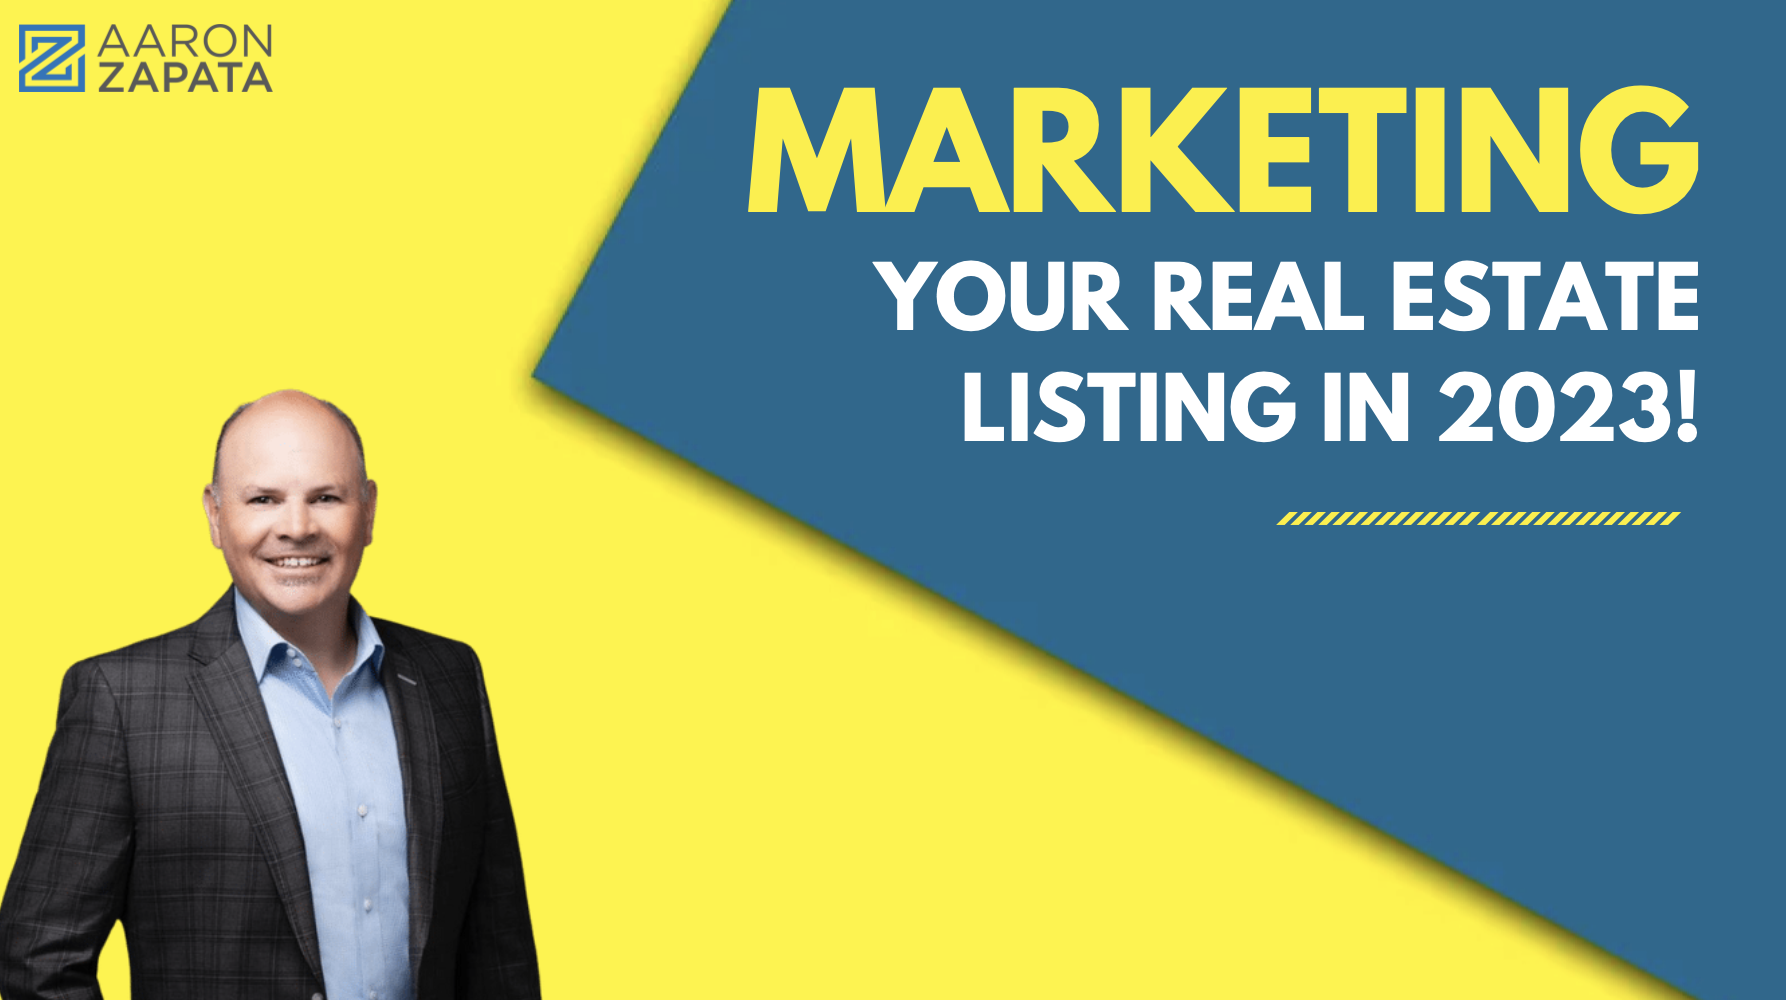 Marketing Your Real Estate Listing in 2023 - Aaron Zapata